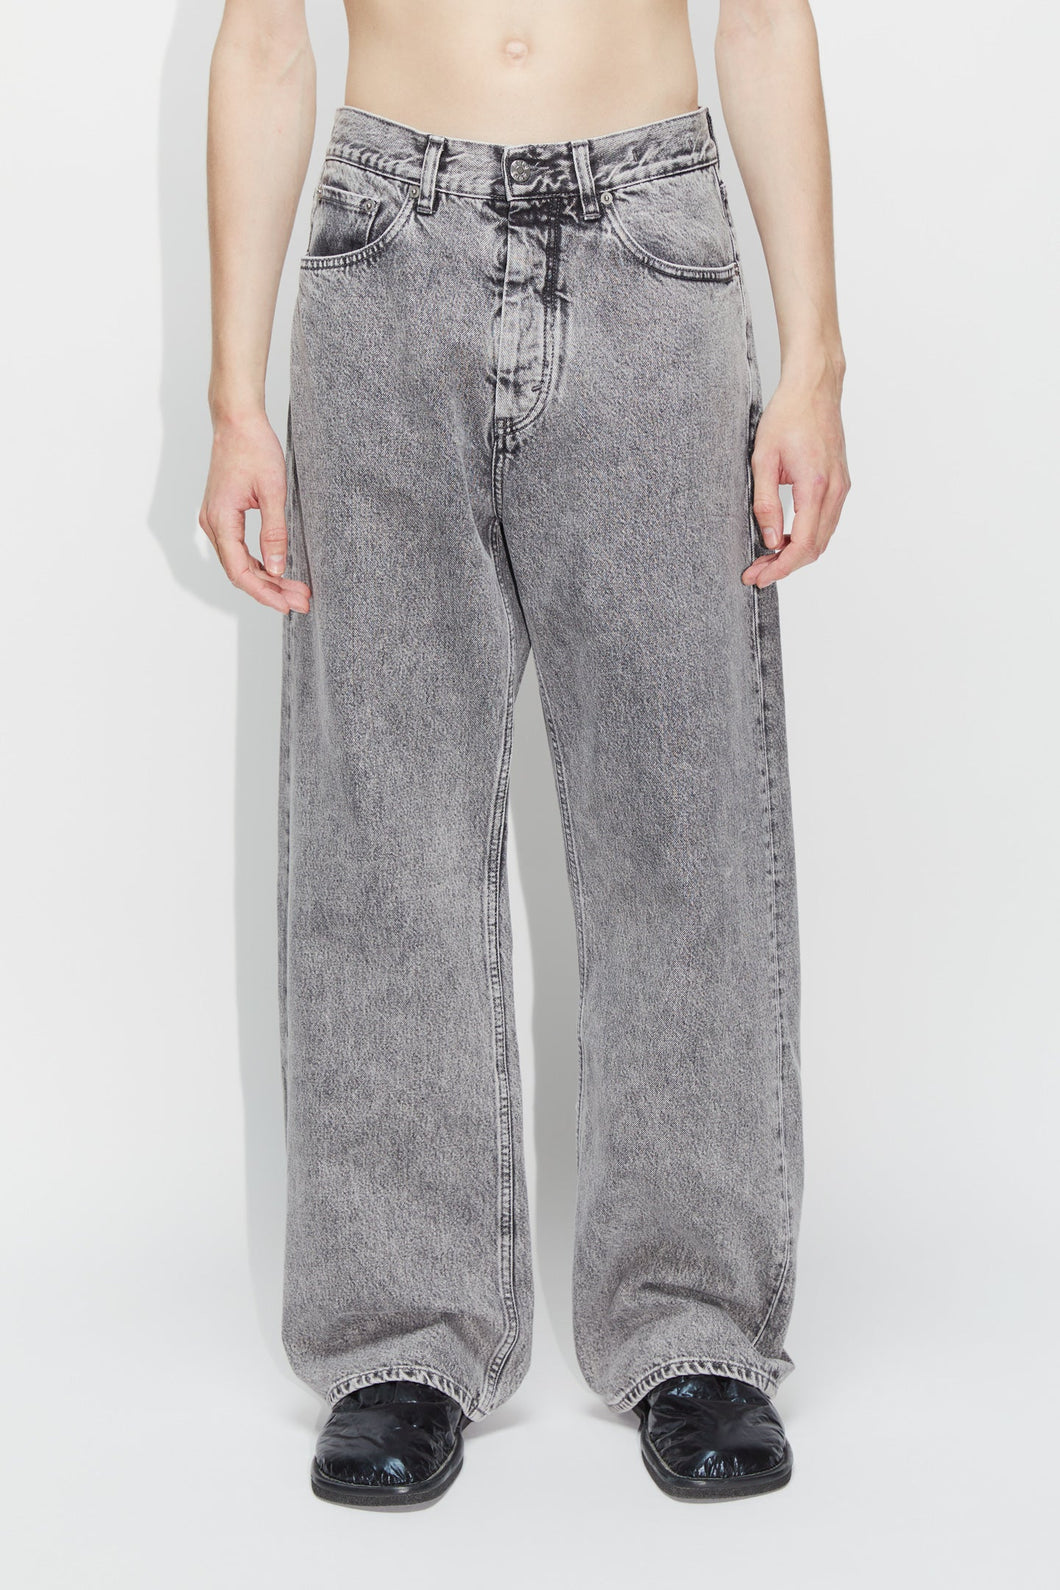 Criss Jeans Mid Grey Stone